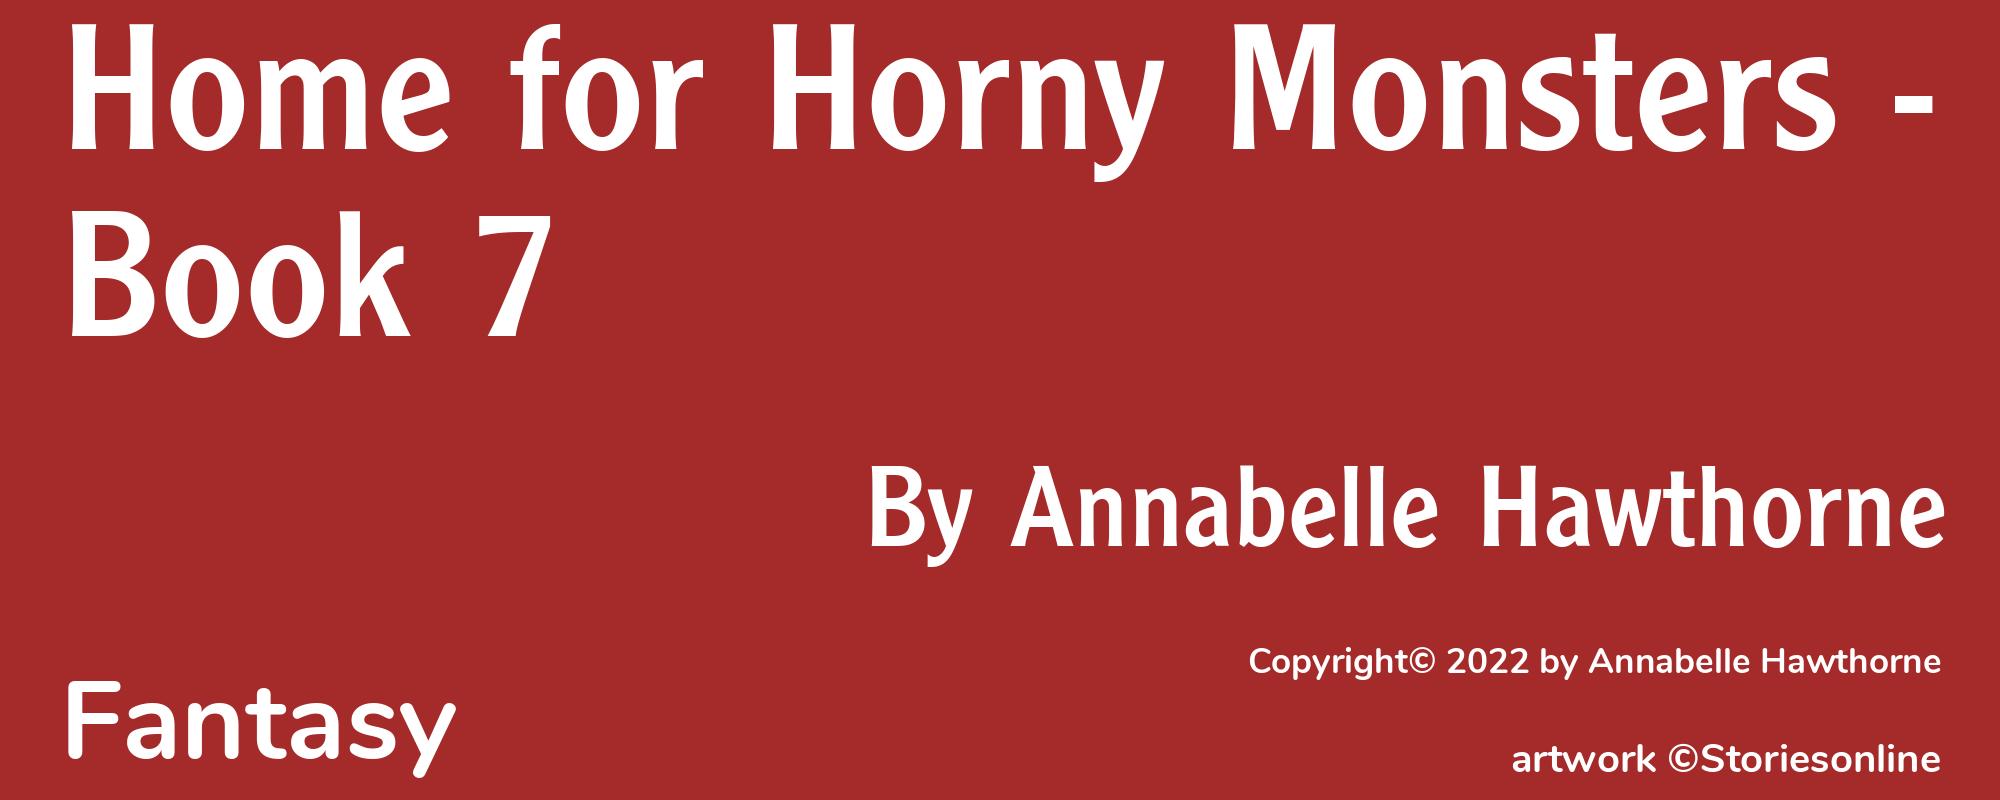 Home for Horny Monsters - Book 7 - Cover